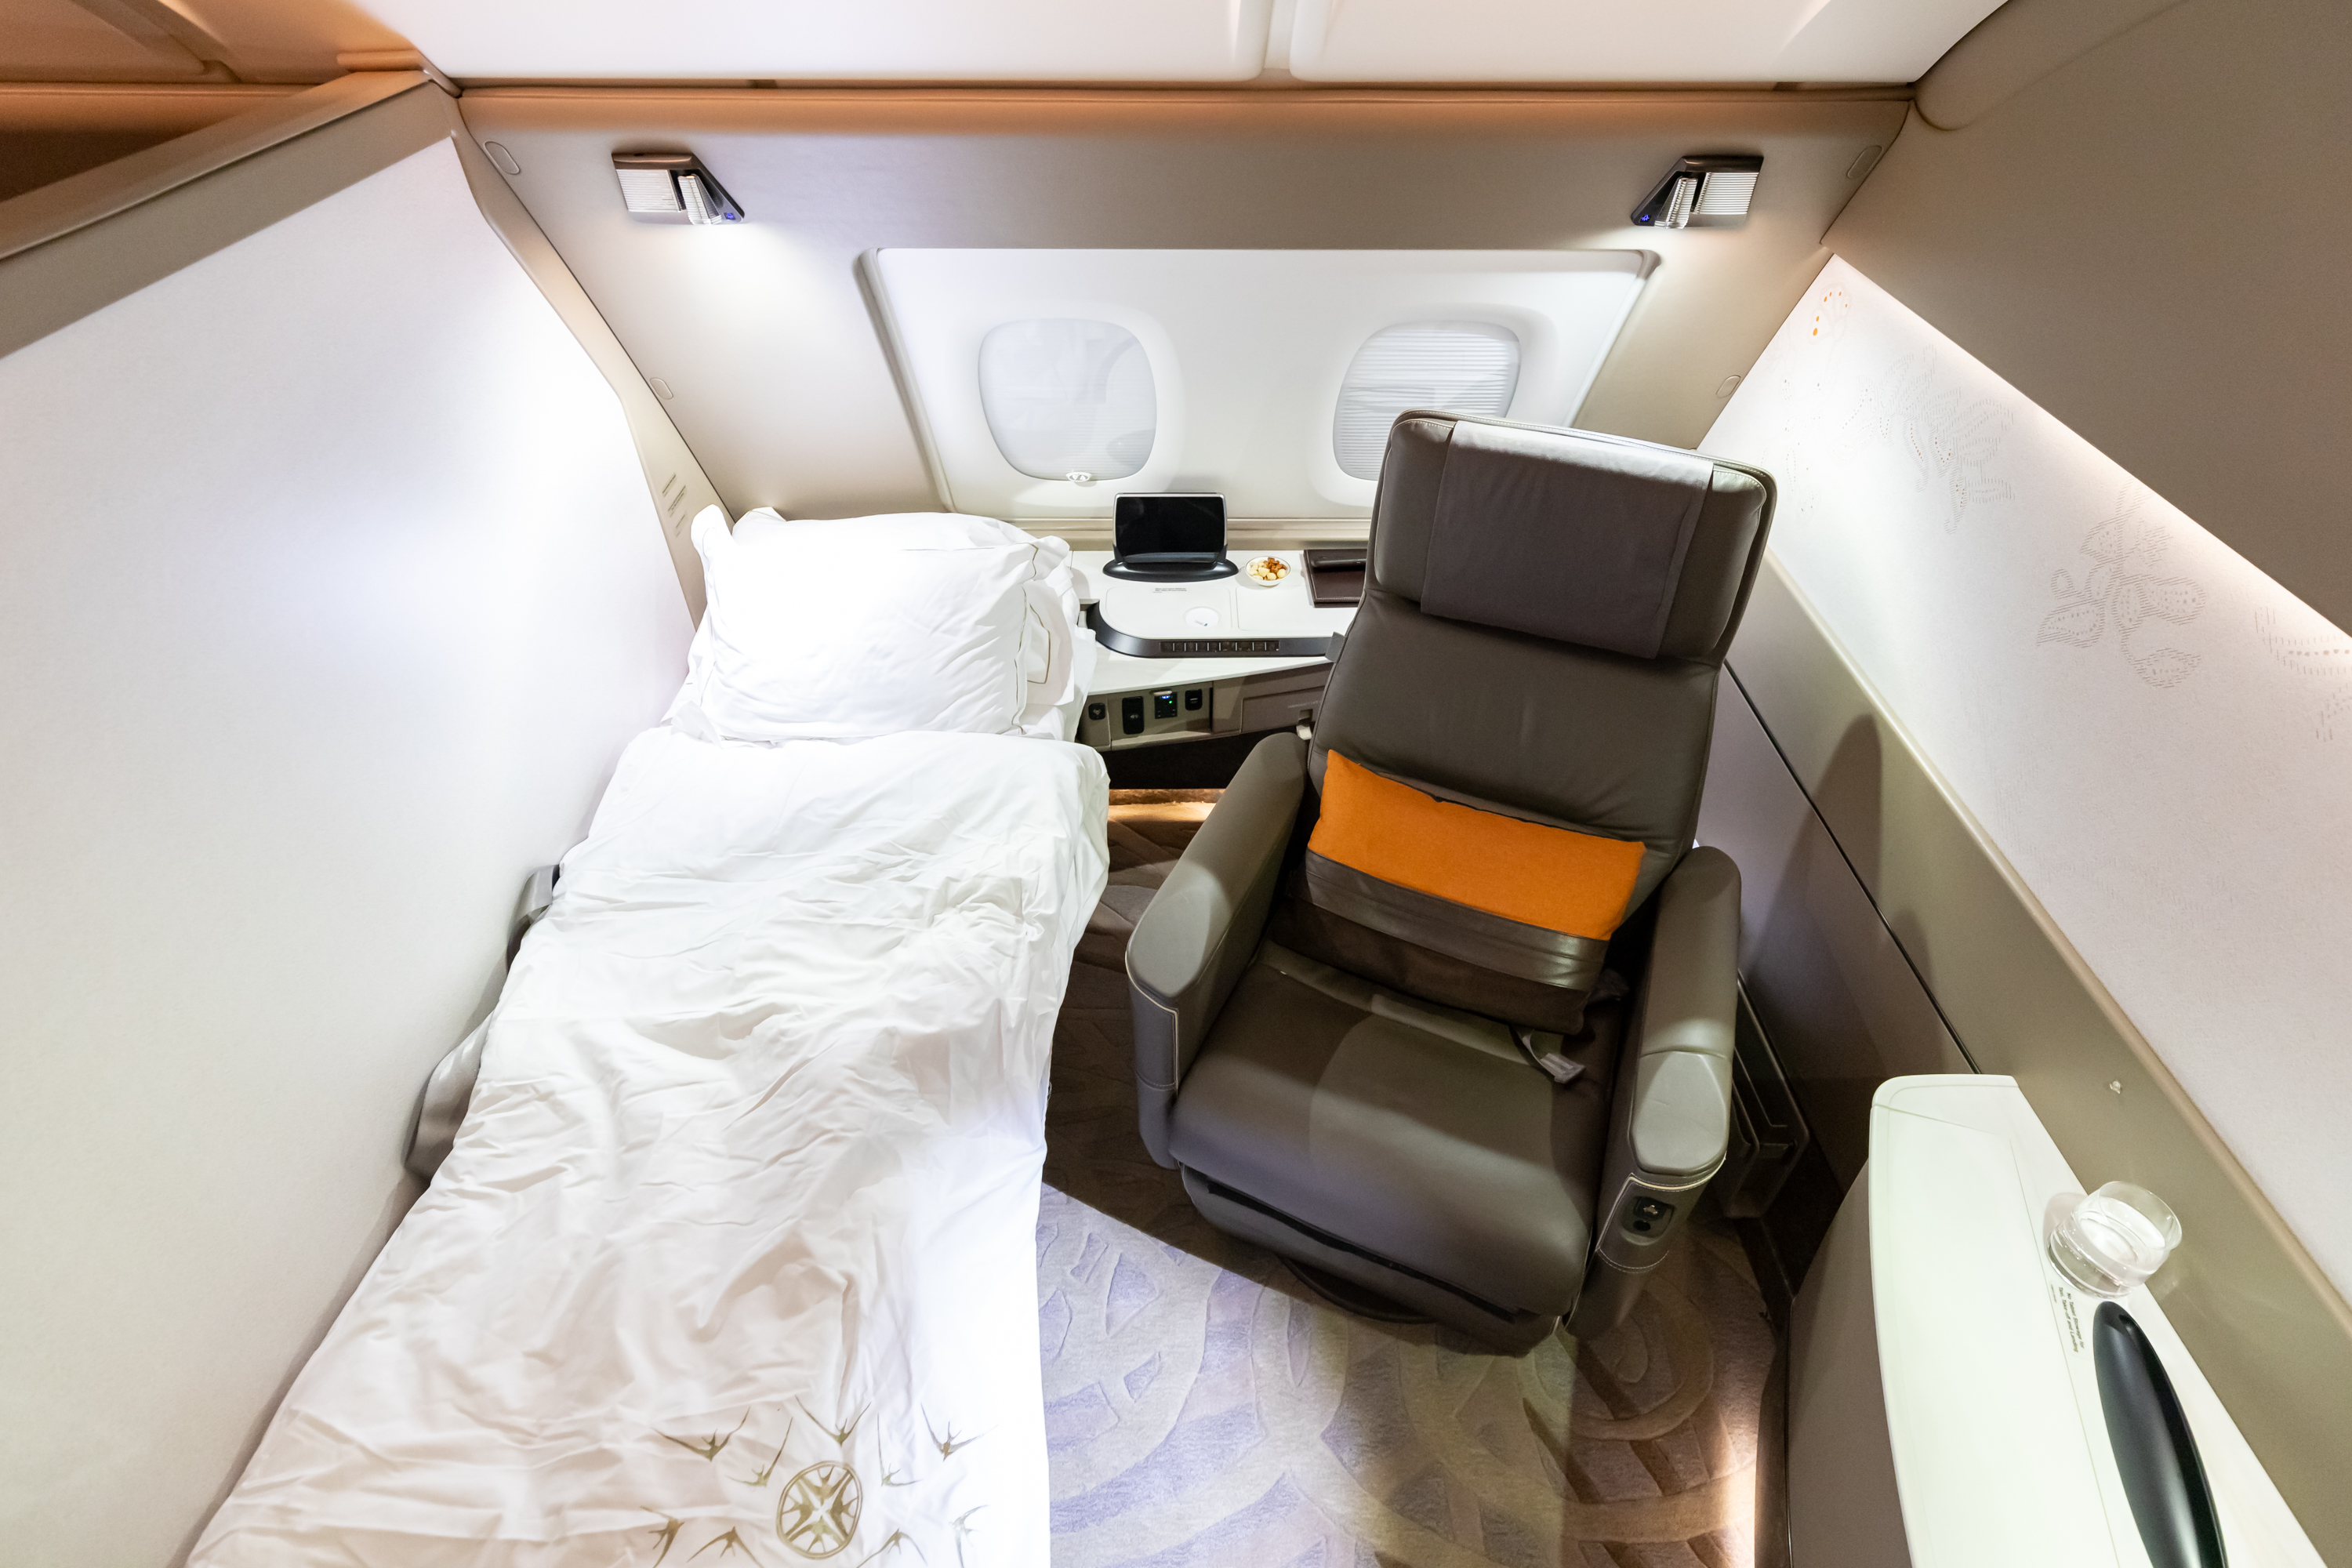 a chair and a bed in a plane